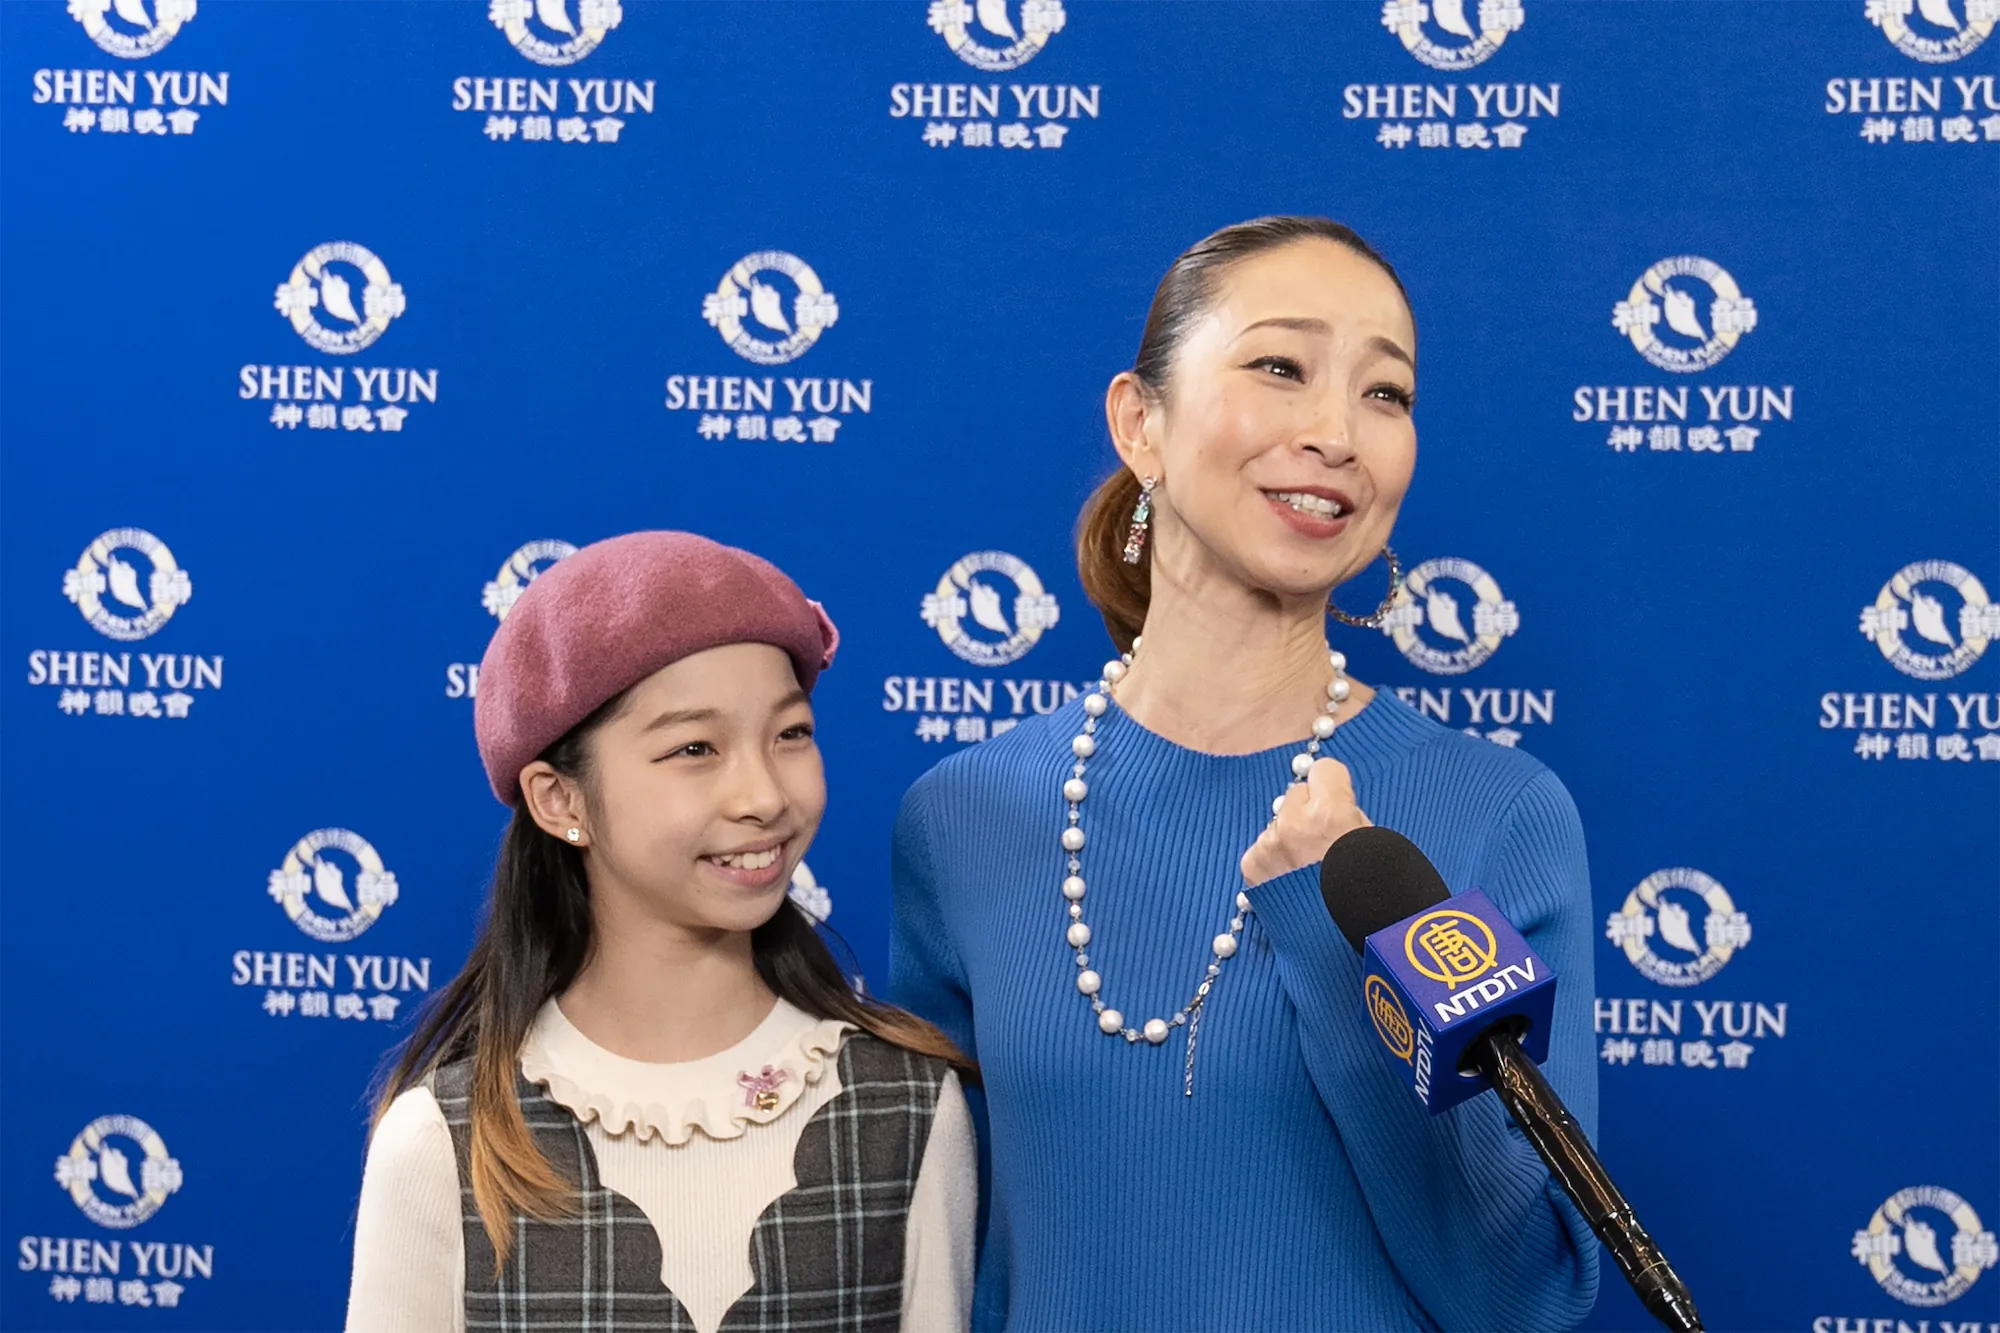 Ballet School Principal and Daughter Moved to Tears After Seeing Shen Yun